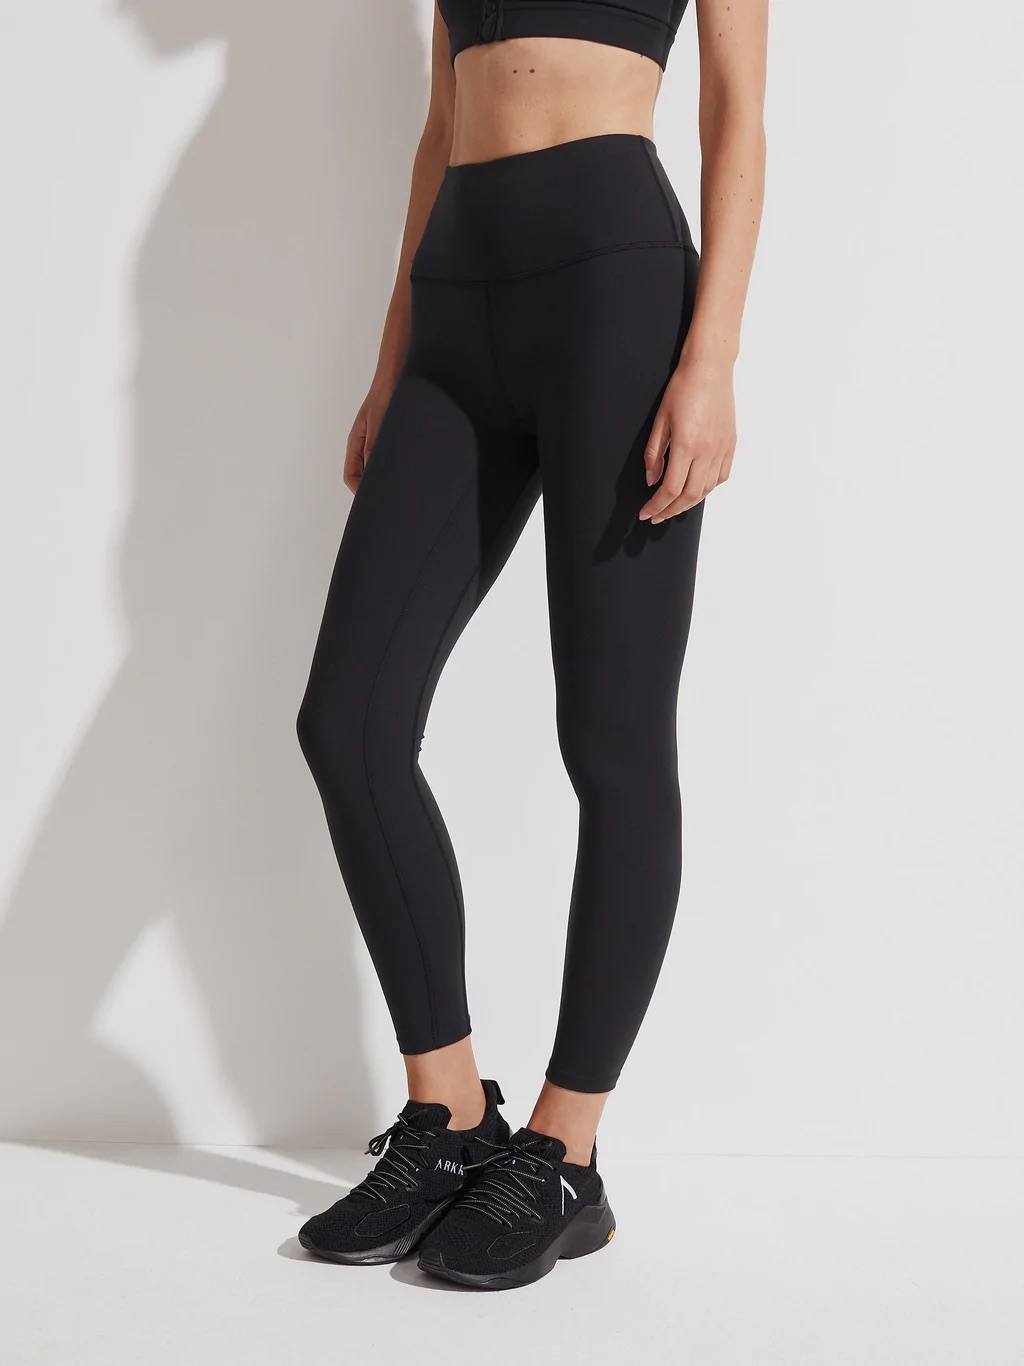 I'm Fussy About Workout Clothes, But These 10 Legging-and-Top Sets Are ...